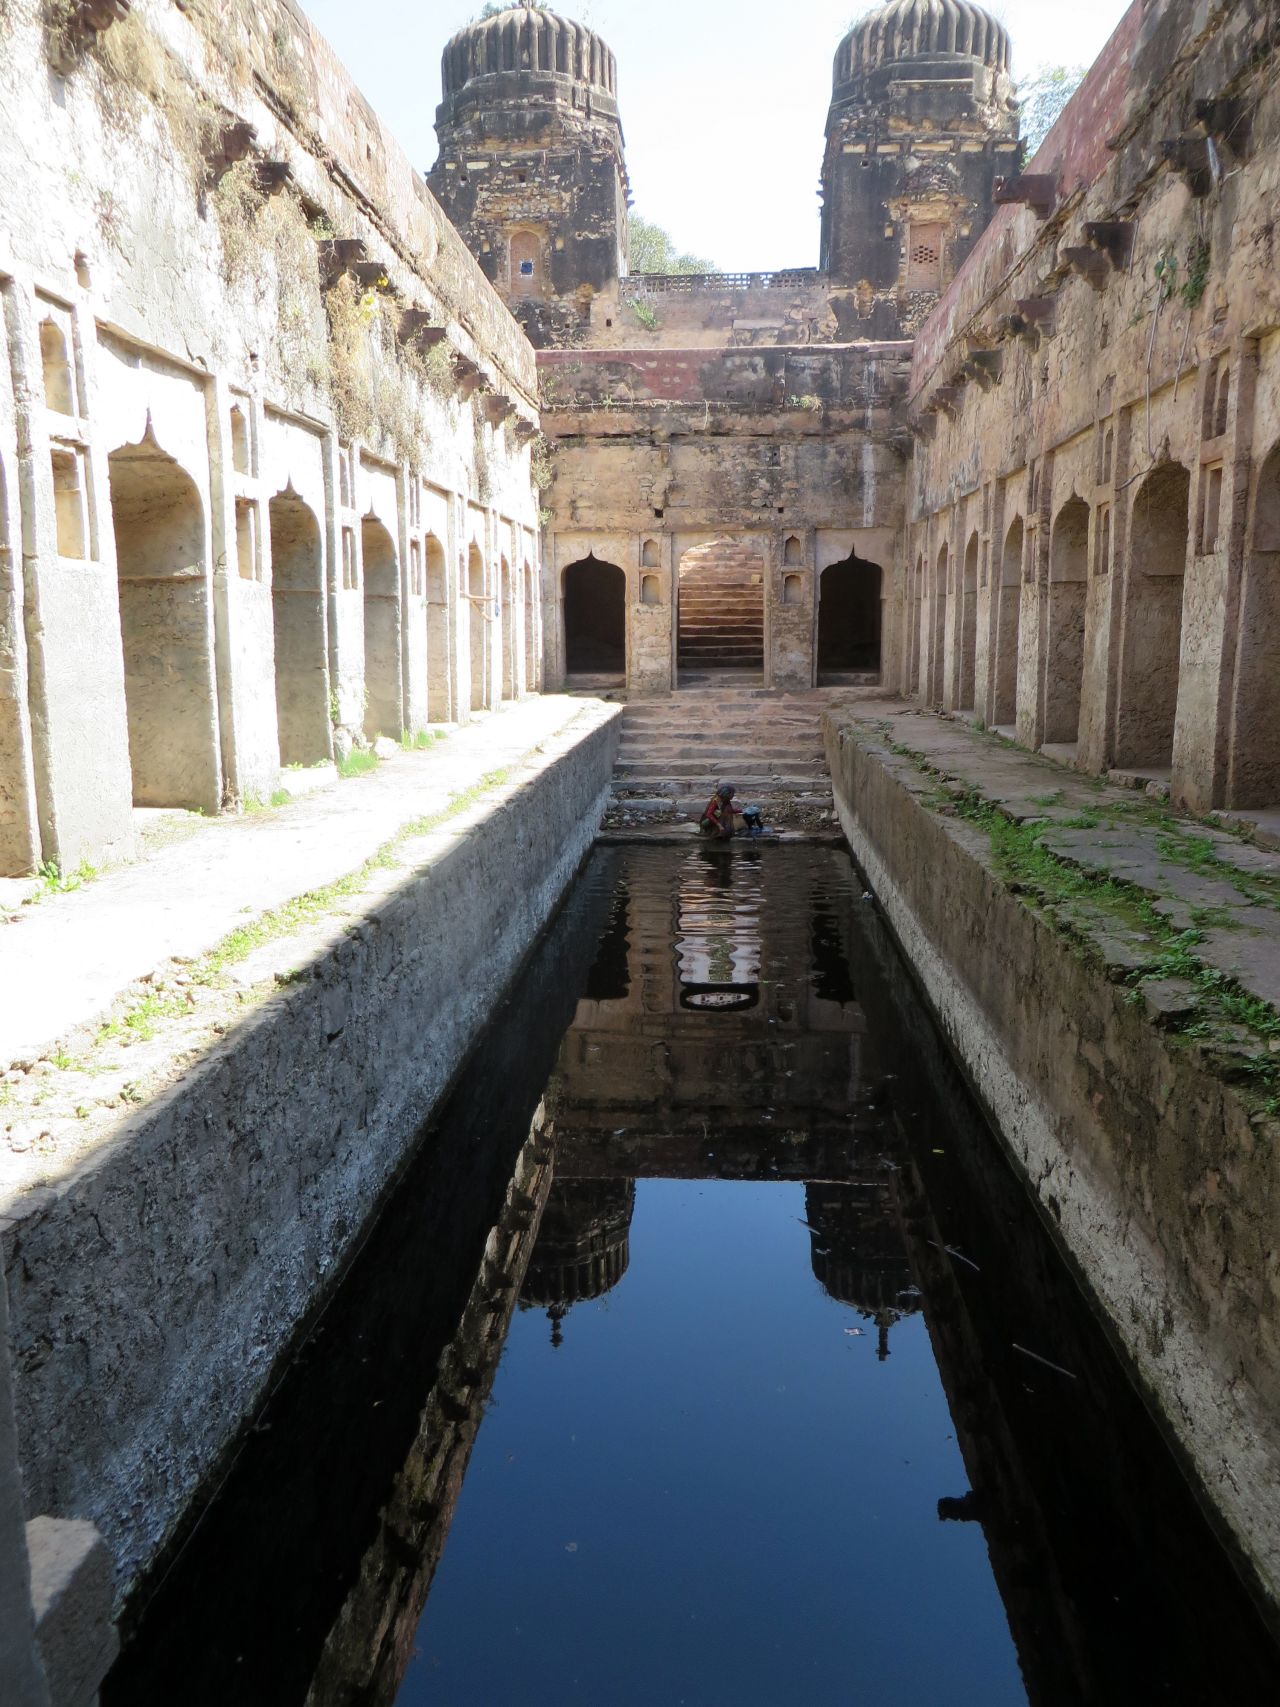 "A farm family cares for this stepwell, using it as it was in past centuries: for drinking, washing, and irrigation. It's large scale, huge entry towers, and architectural details make it another of my favorites -- an unexpected treasure way out in the countryside."